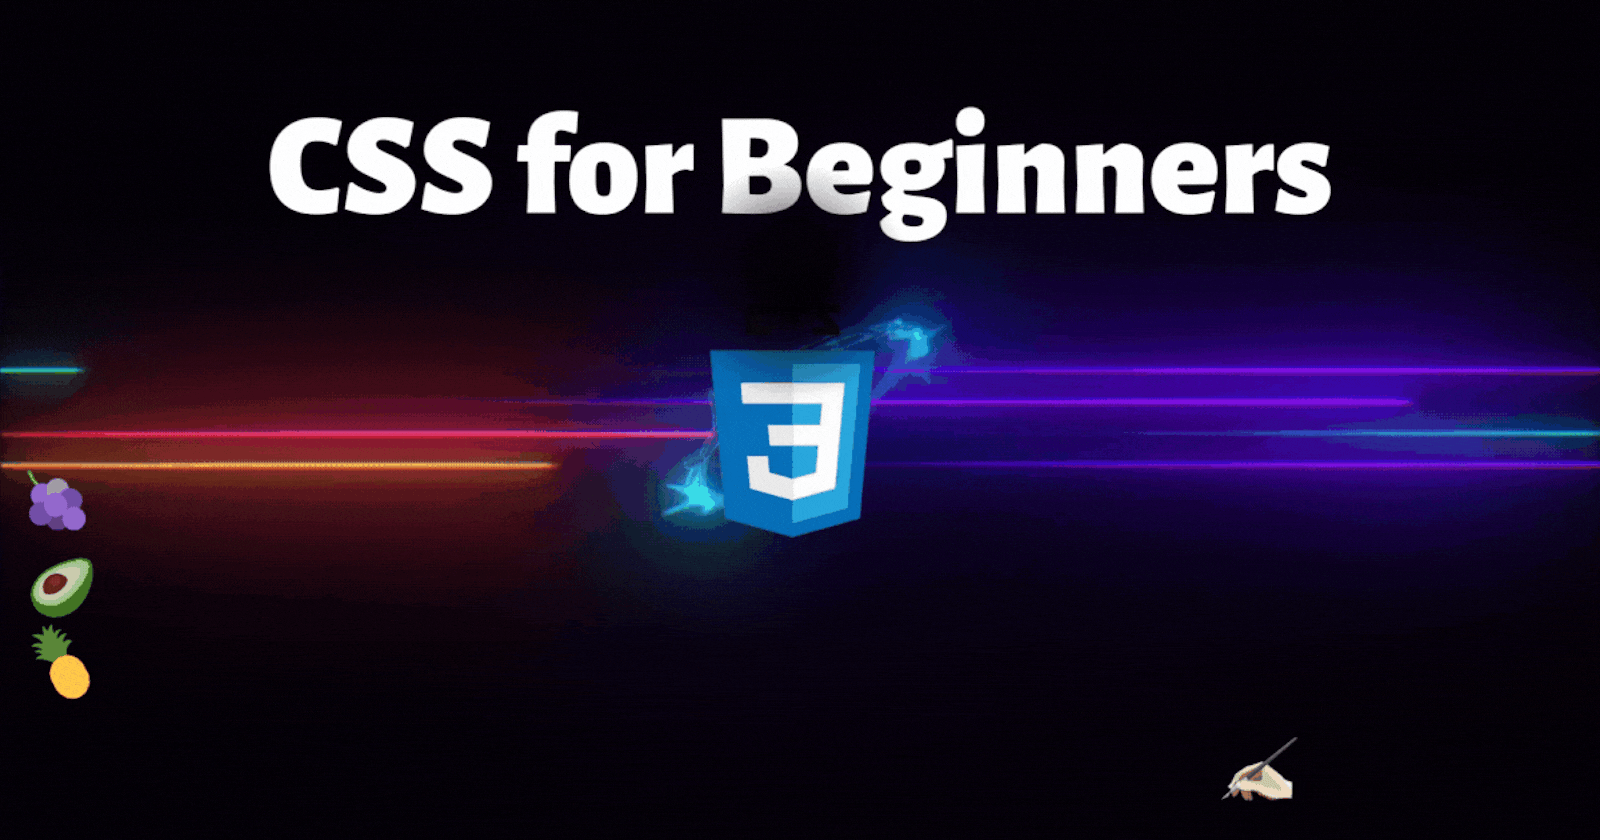 CSS for Beginners Part 2 (Let's start with Code👩🏻‍💻)